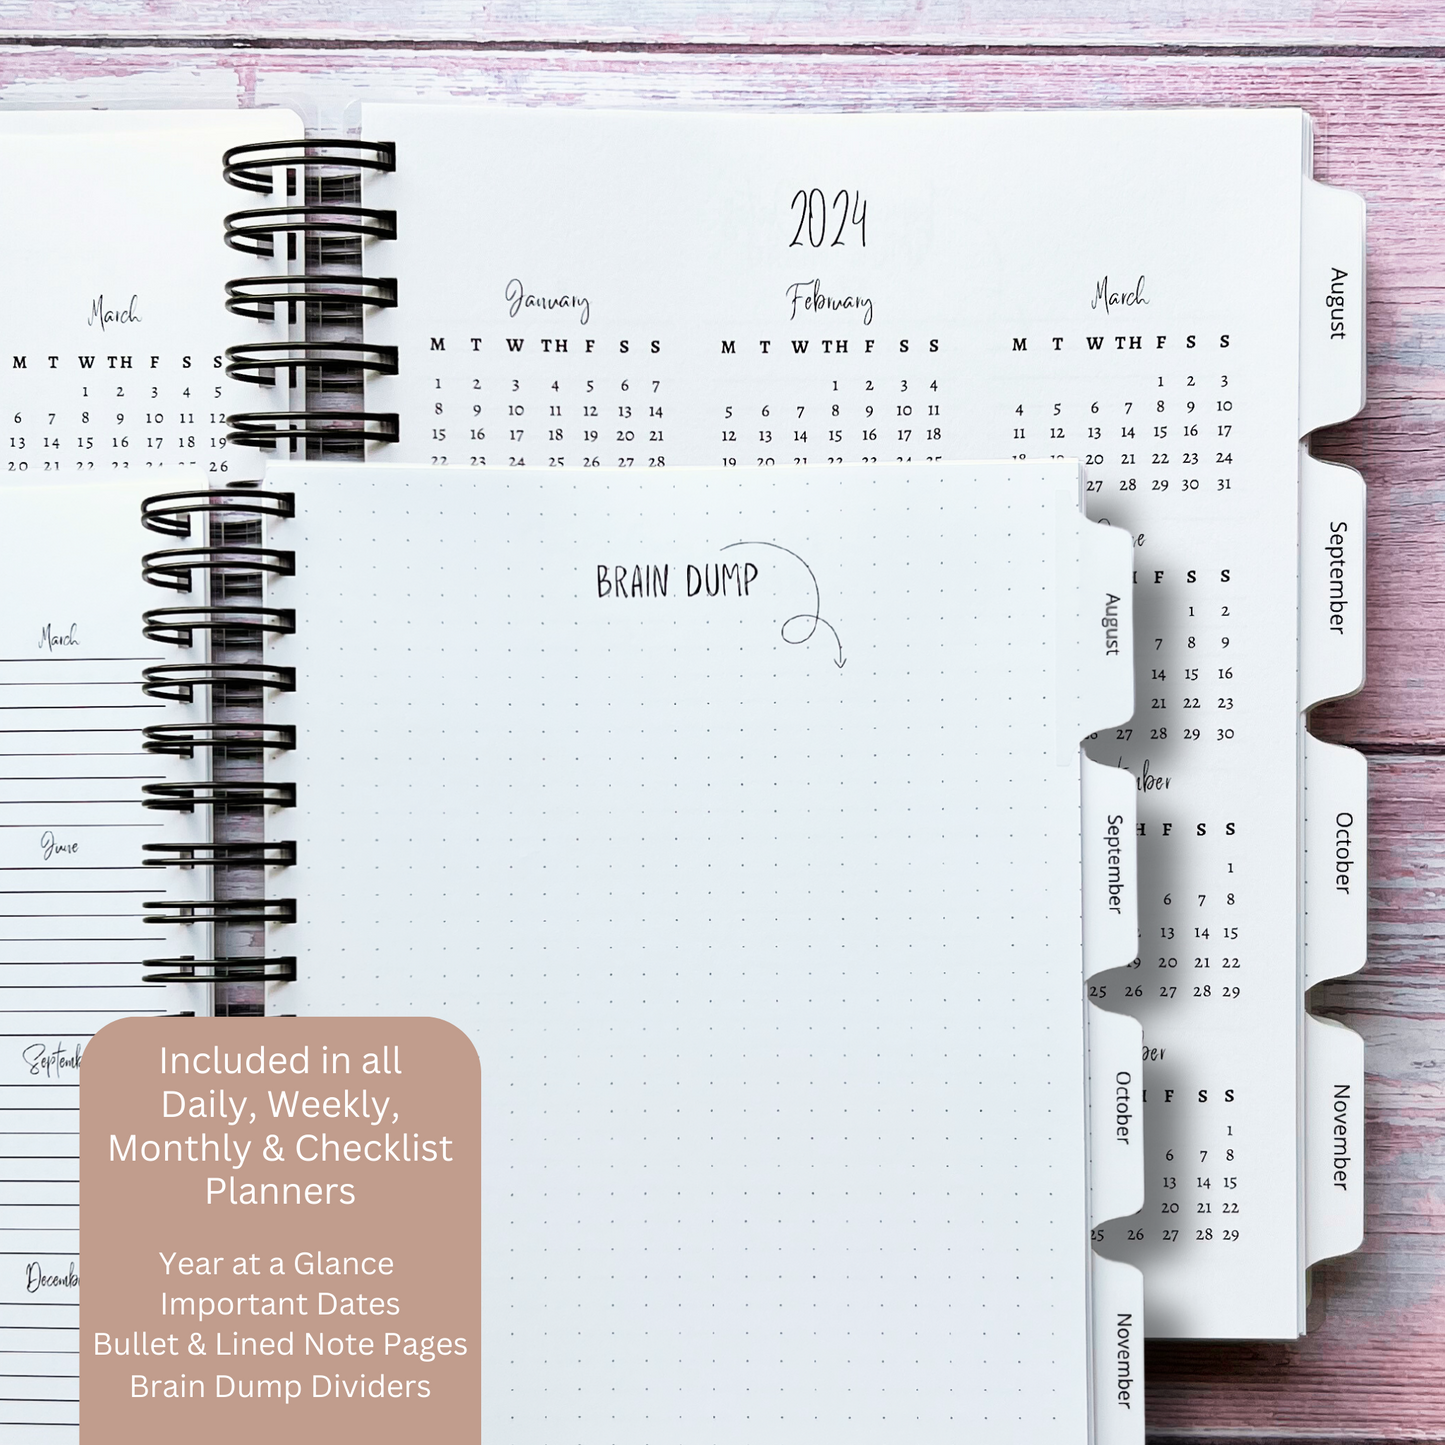 Personalized Monthly Planner - Relax Refresh Renew